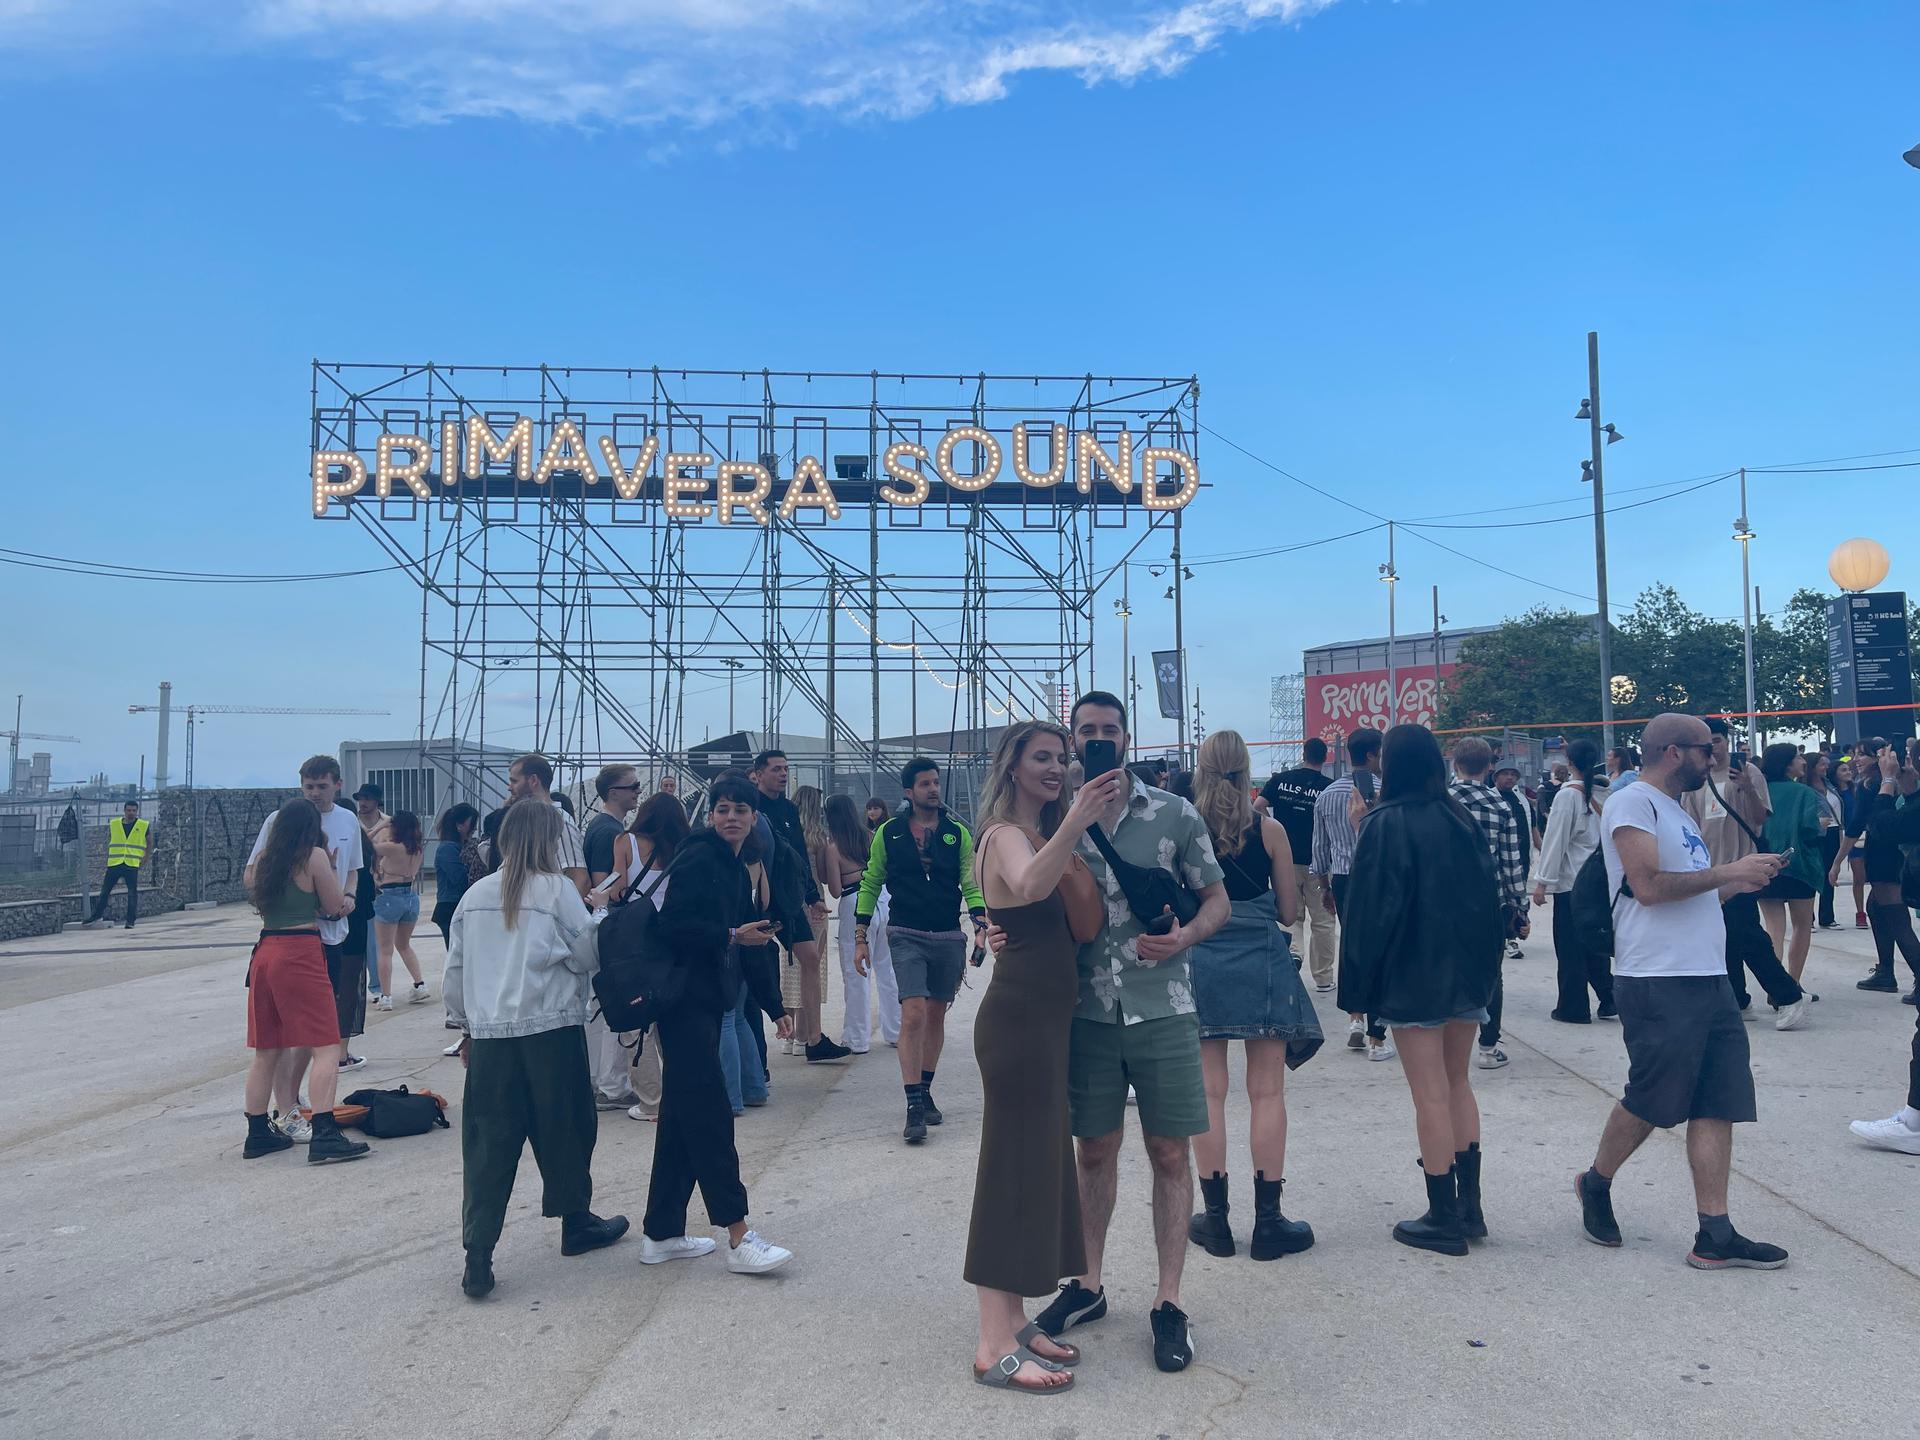 People standing near a large fixture that spells Primavera Sound